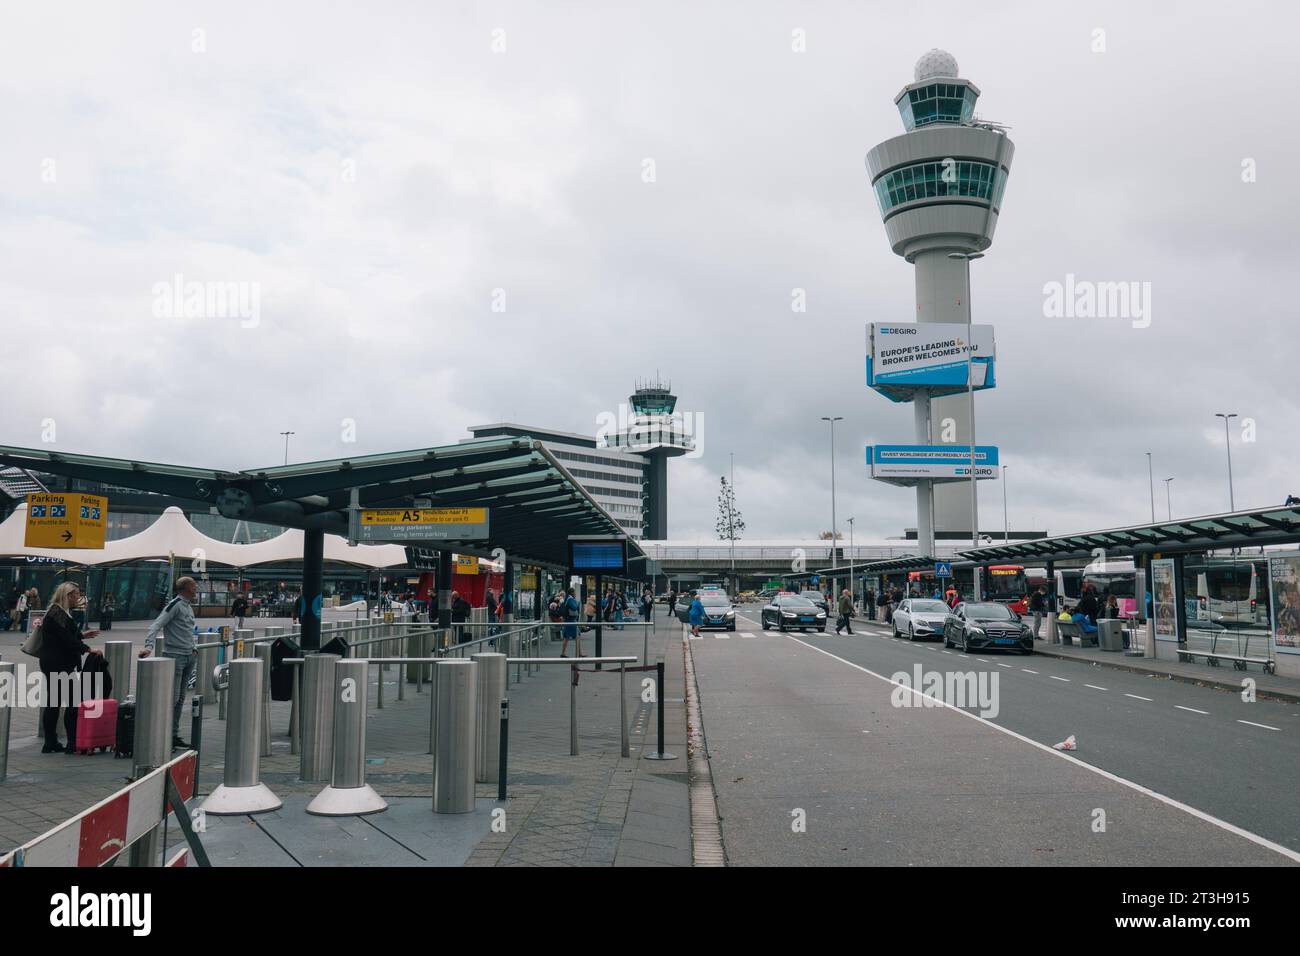 the control tower at Amsterdam Schiphol airport, as seen from the arrivals pick-up area, on an overcast day. A DEGIRO ad can be seen on a billboard. Stock Photo